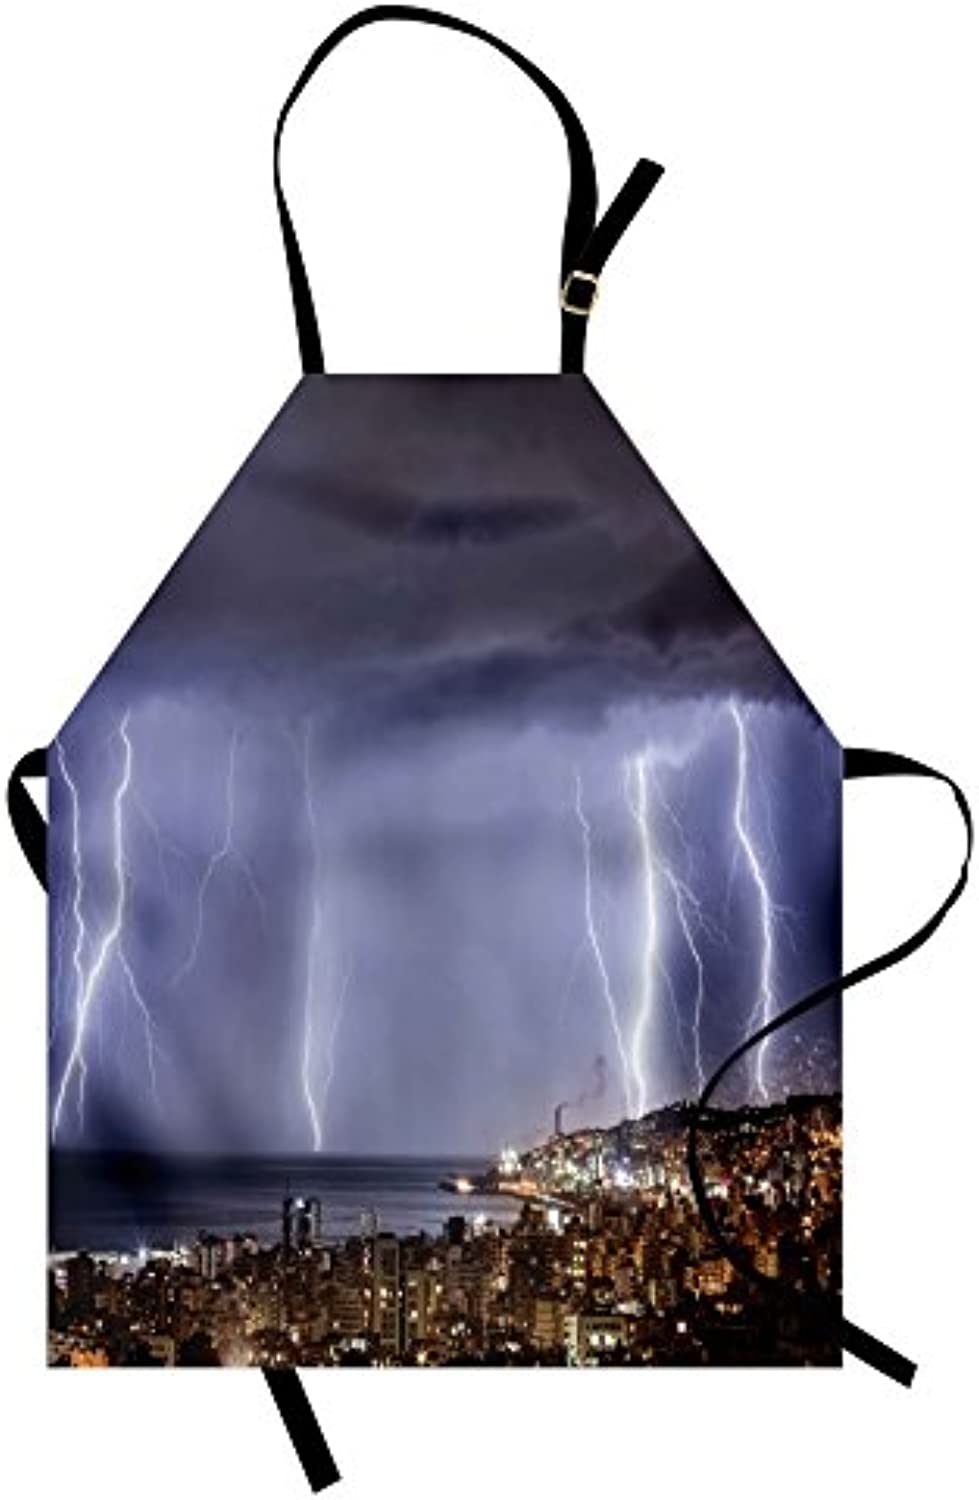 Granbey Nature Apron  Majestic View on Coastal Town in Dark Stormy Night Giant Rain Cloud and Photo  Unisex Kitchen Bib with Adjustable Neck for Cooking Gardening  Adult Size  Ceil Blue